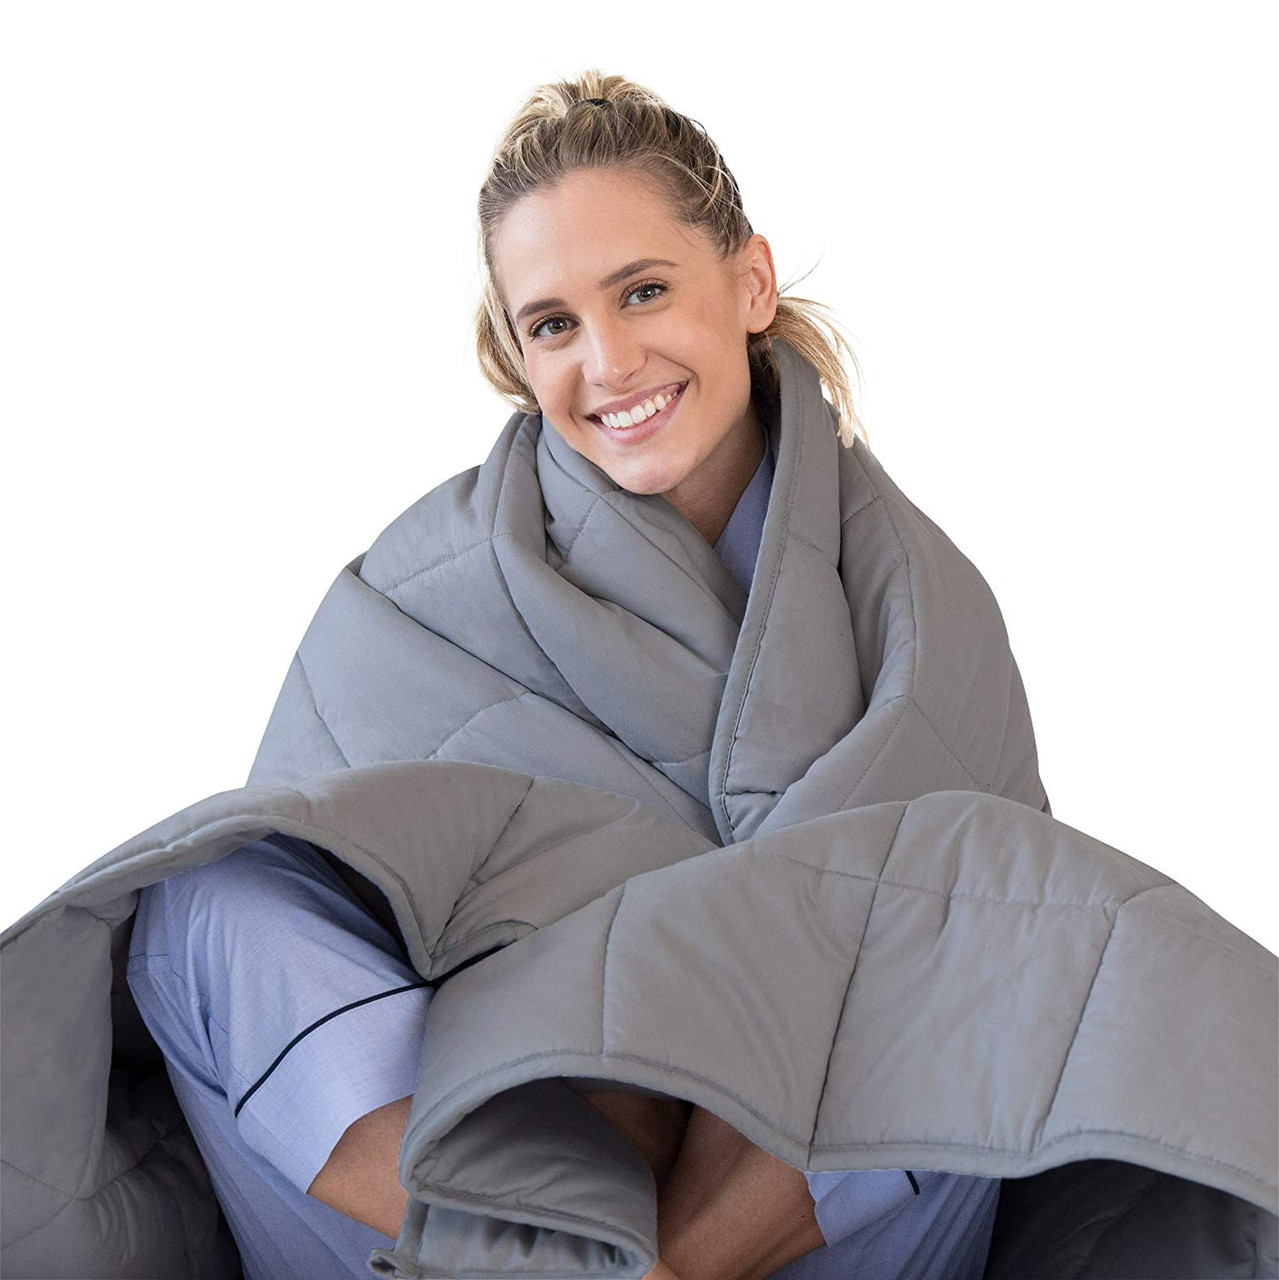 LUNA Weighted Blanket For Hot And Cold Sleepers - TheAnxietyStore.com